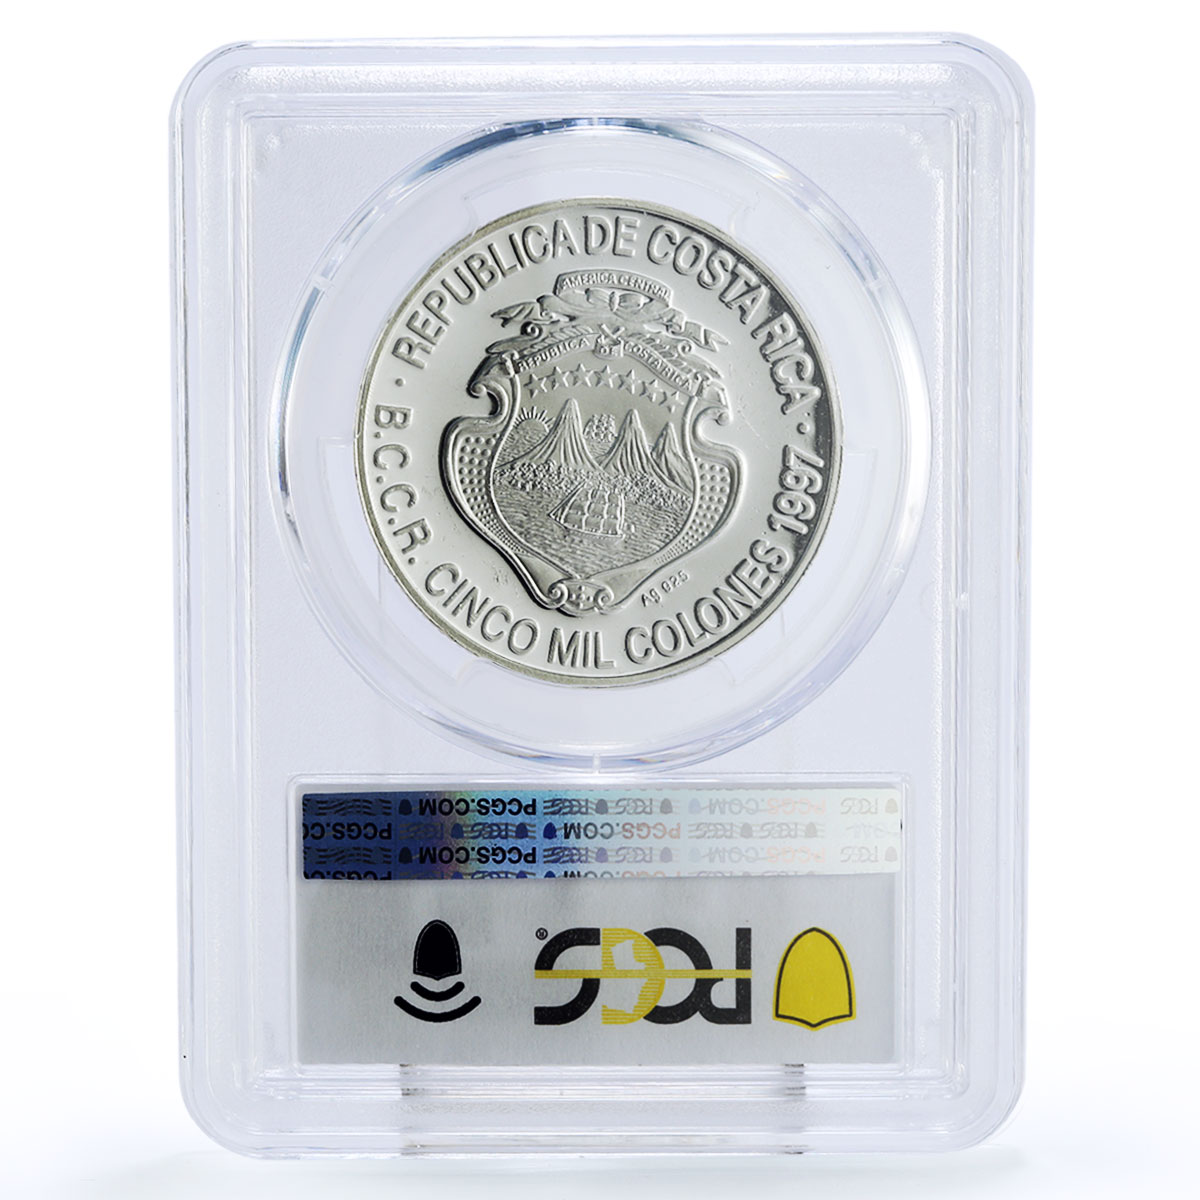 Costa Rica 5000 colones 100 Years Colone Columbus Ship PR64 PCGS Ag coin 1997